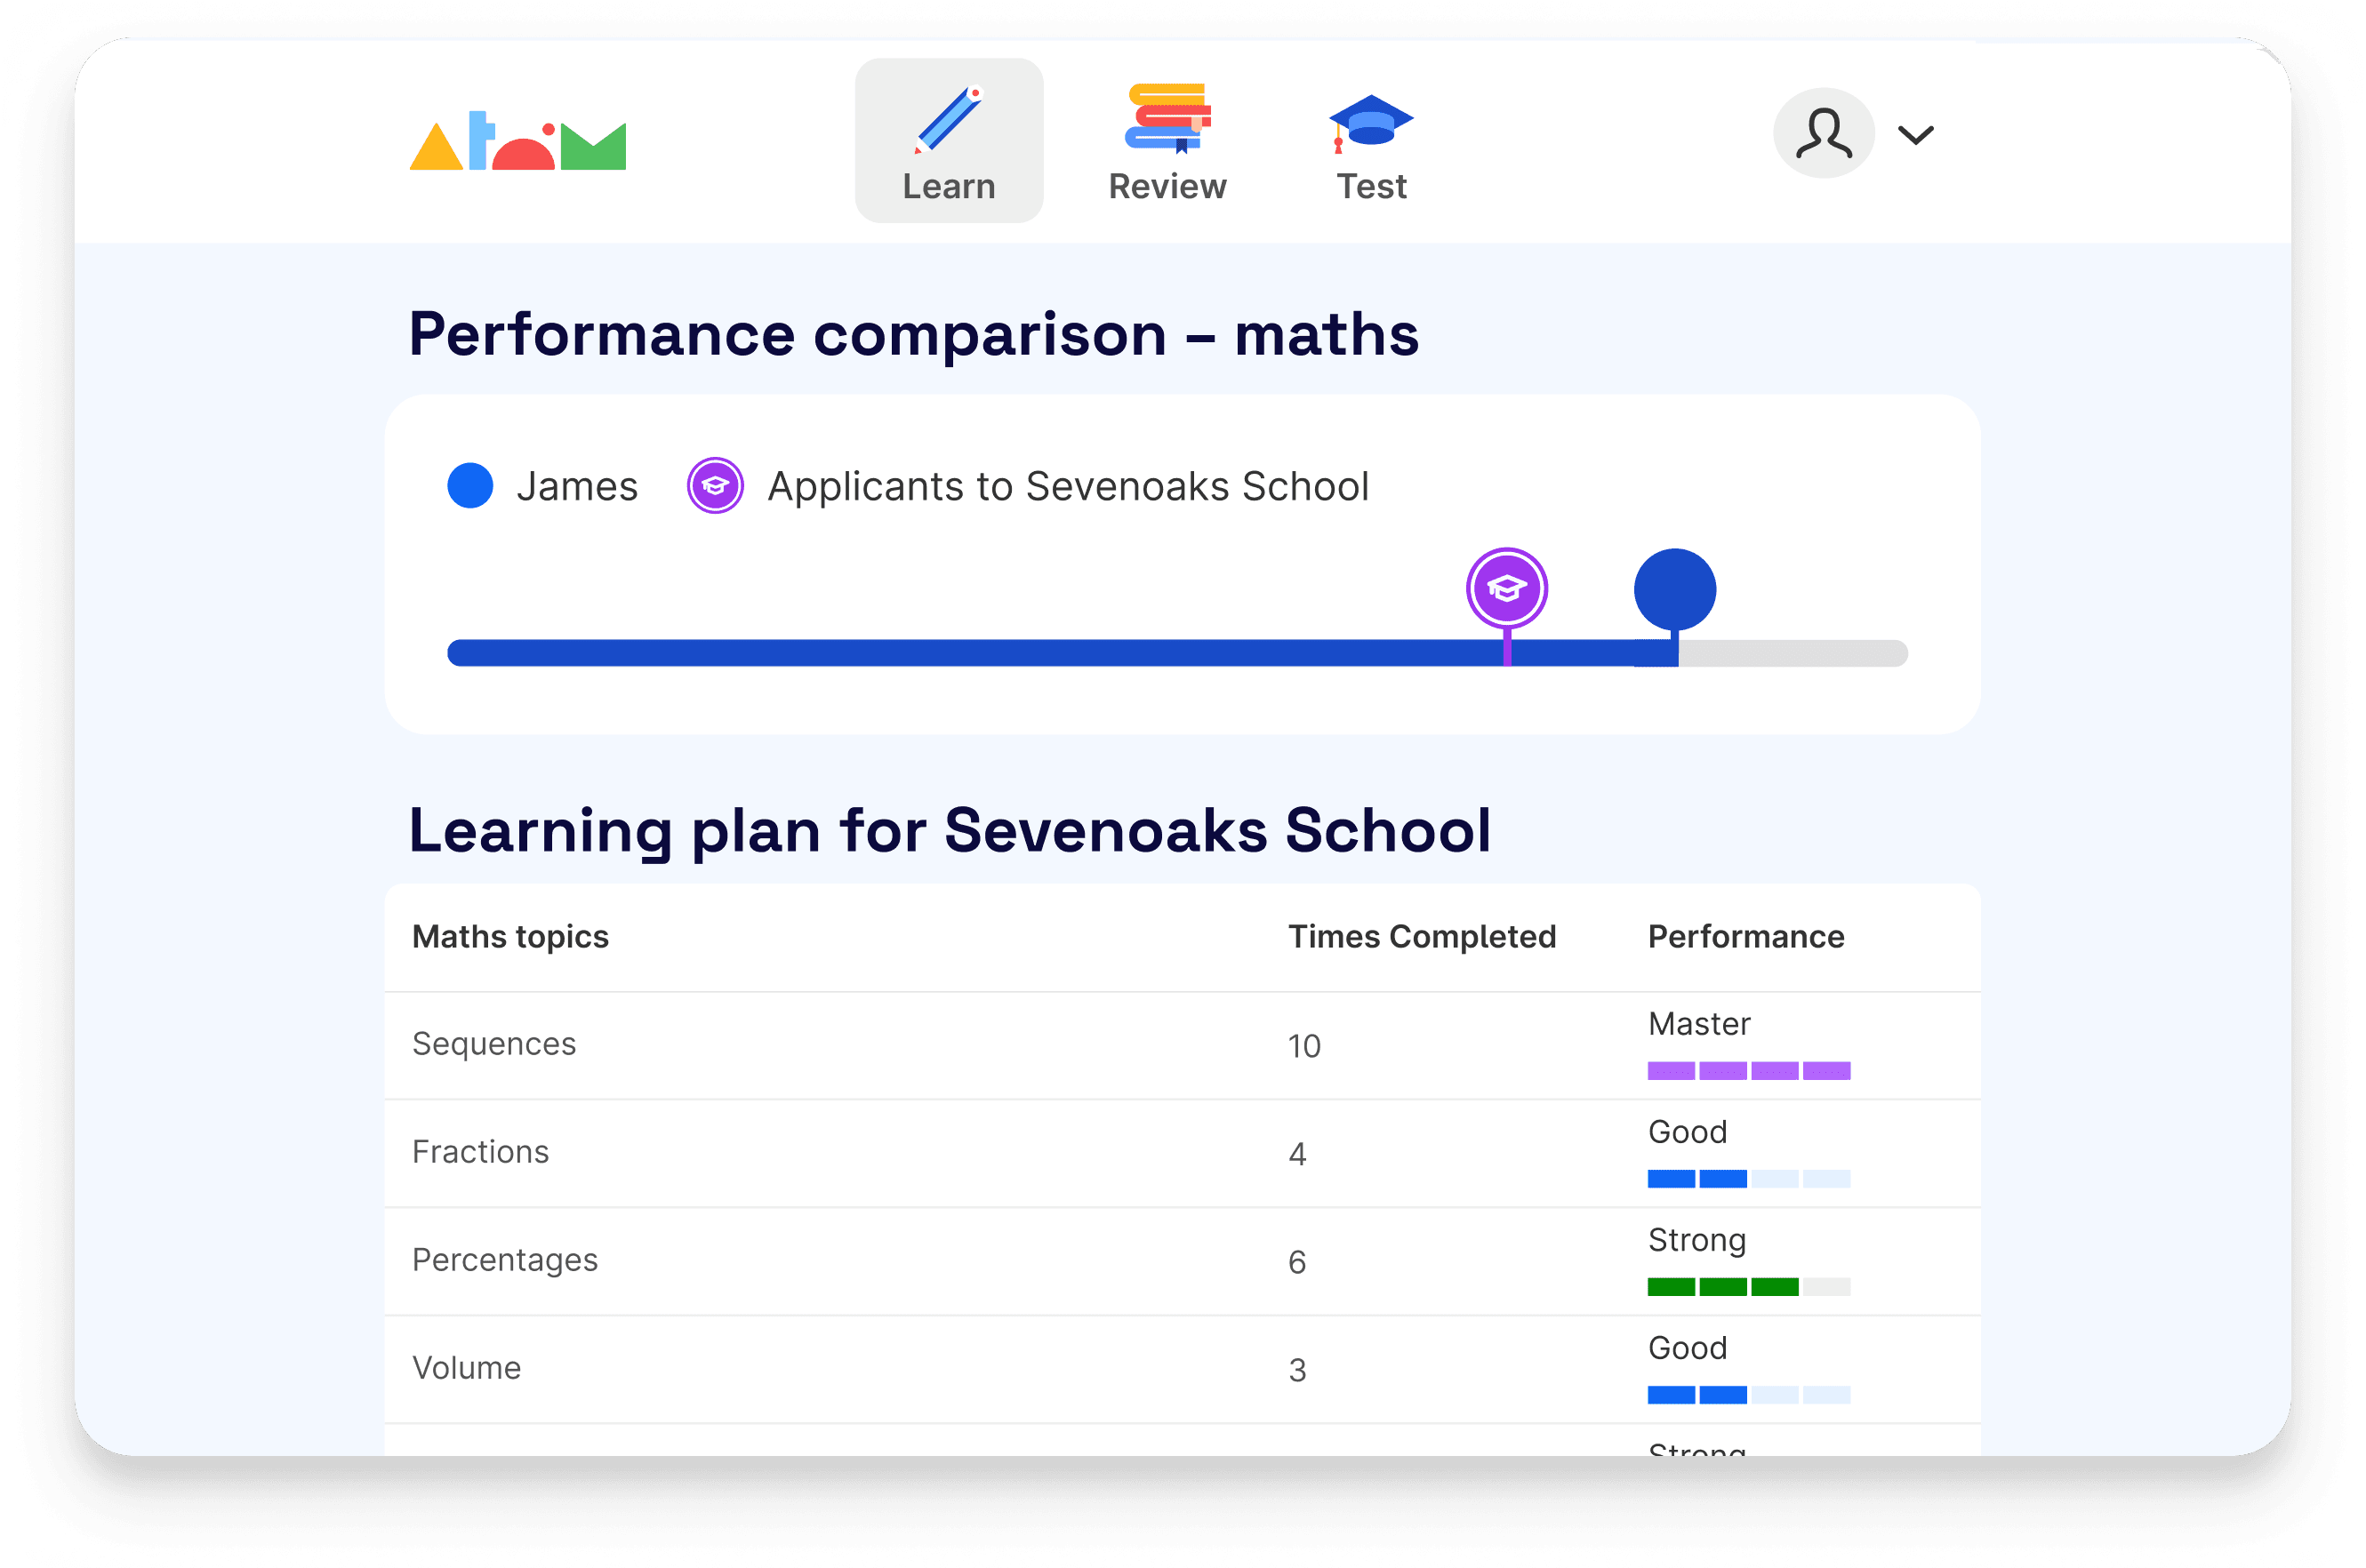 Learning plan and performance comparison for Sevenoaks School